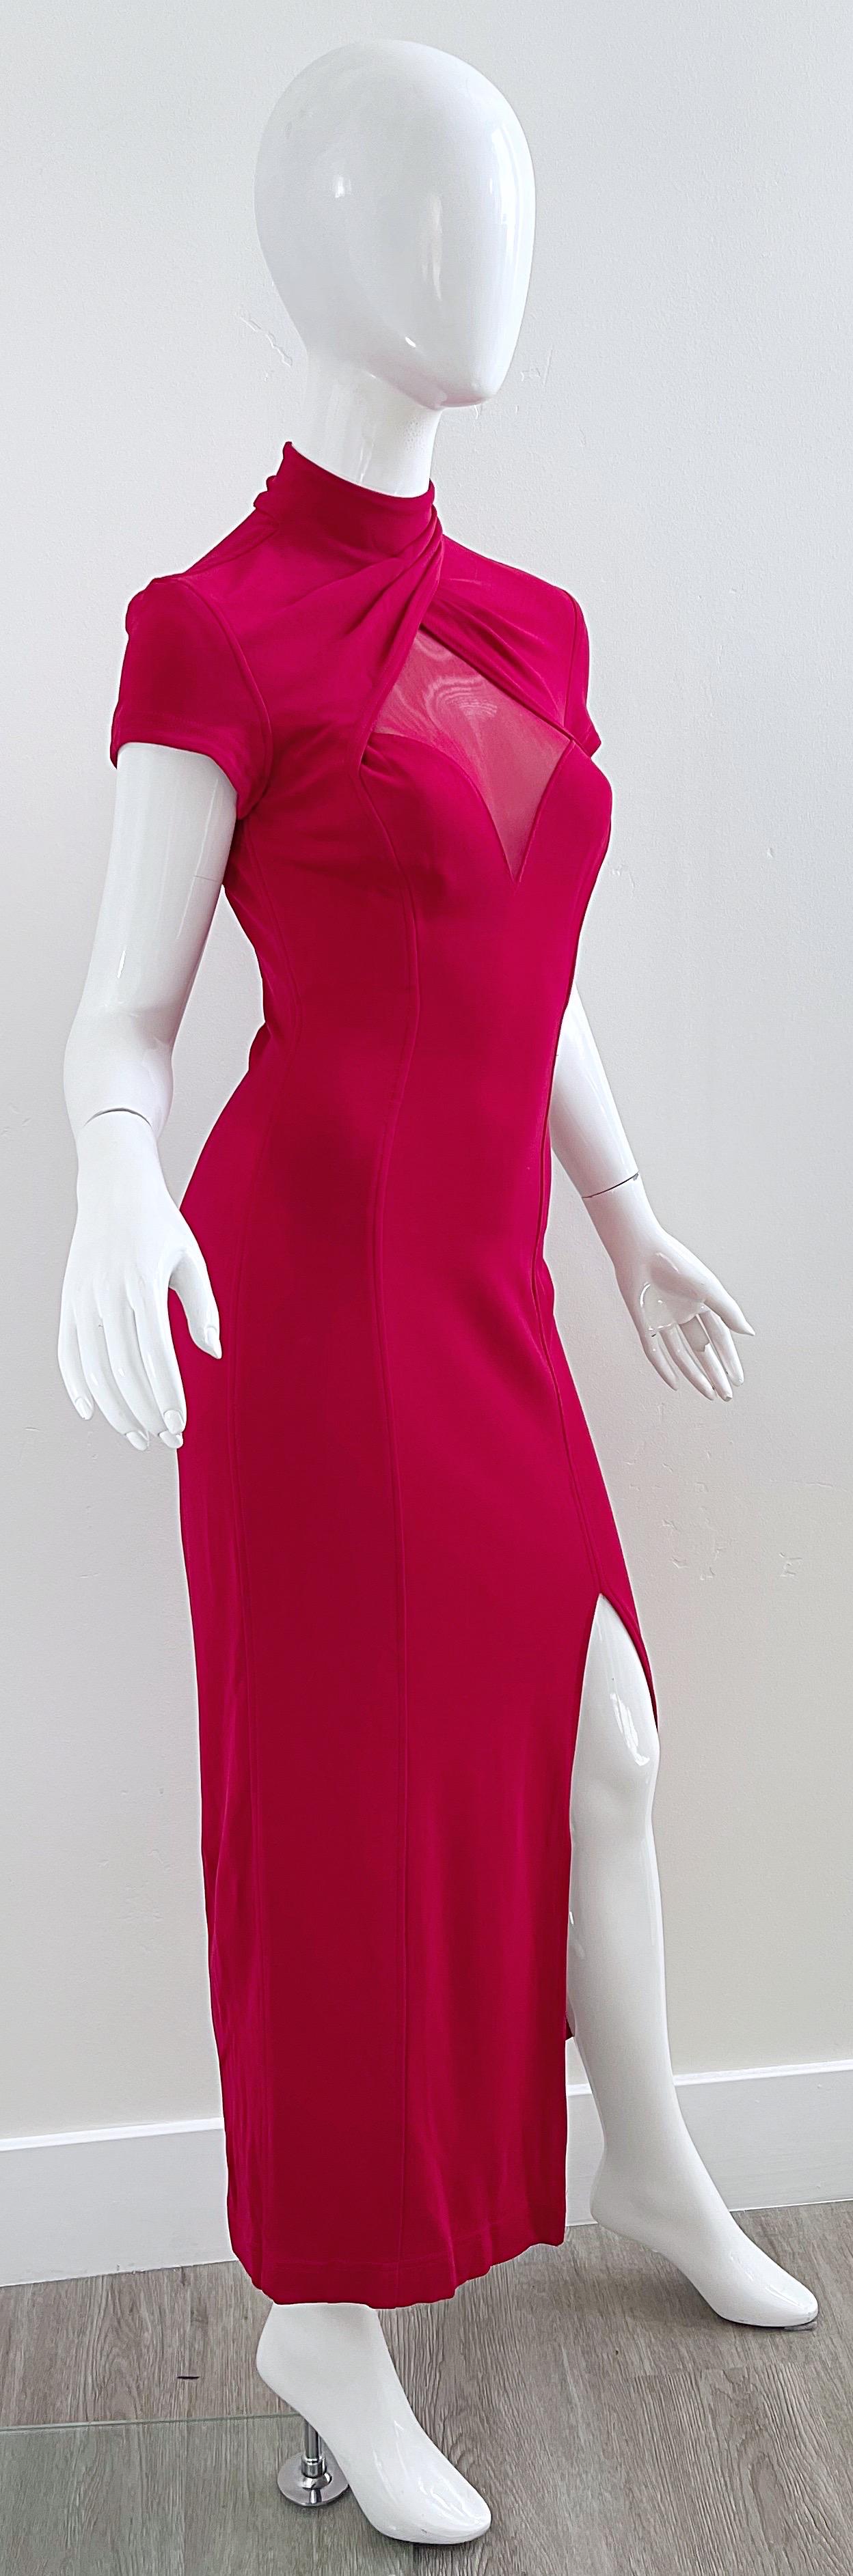 1990s Tadashi Lipstick Red Sexy Cut-Out Bodycon Vintage 90s Jersey Evening Dress For Sale 1